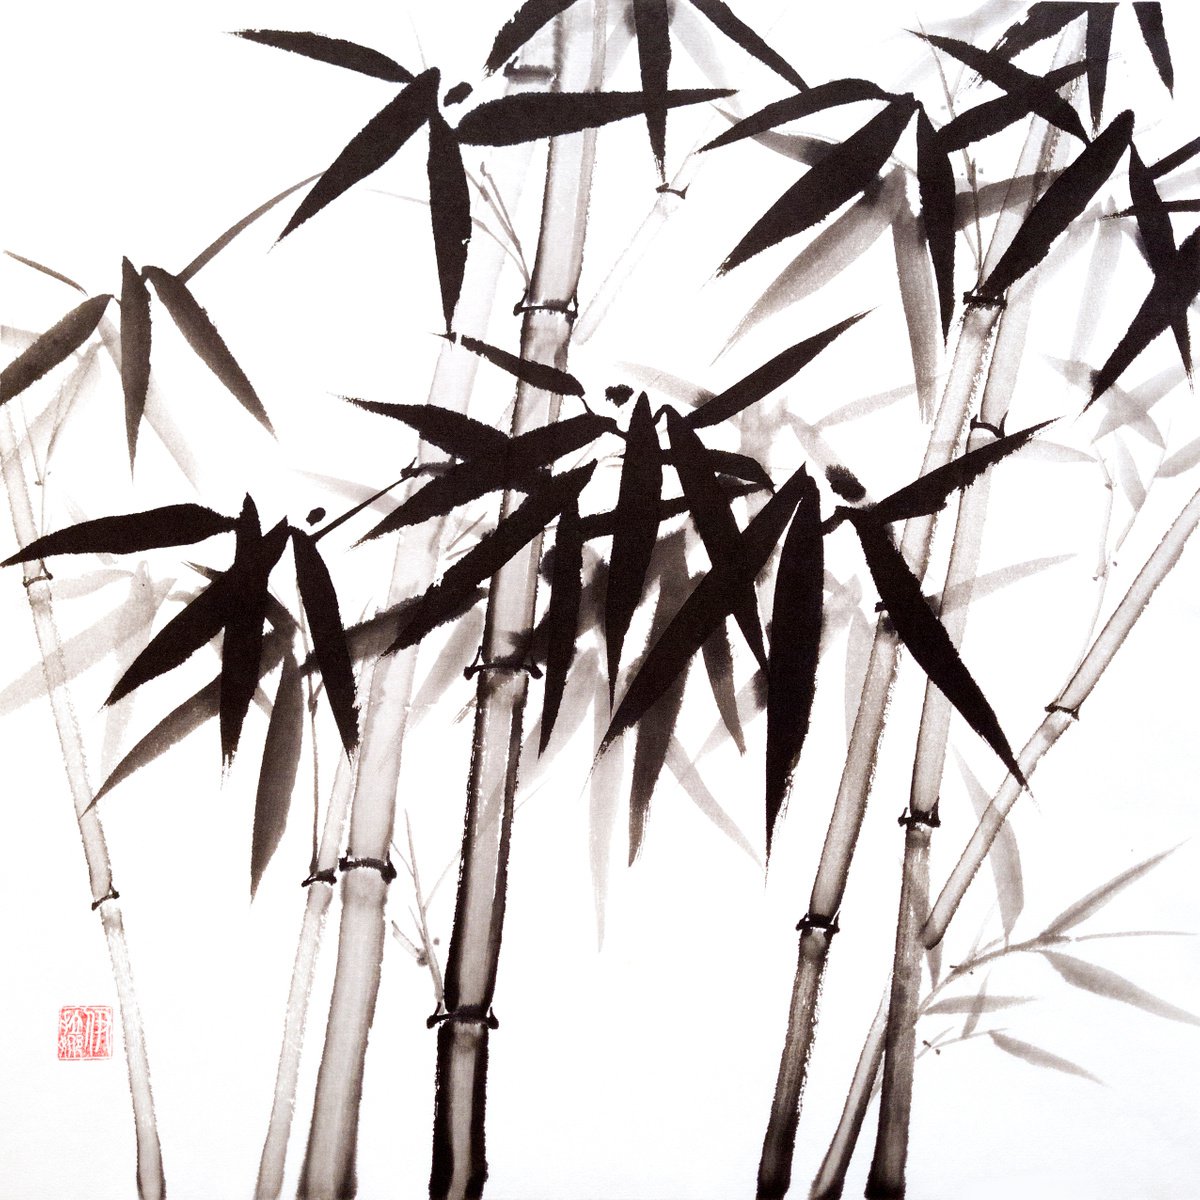 The shadowy depths of a forest - Bamboo series No. 2114 - Oriental Chinese Ink Painting by Ilana Shechter